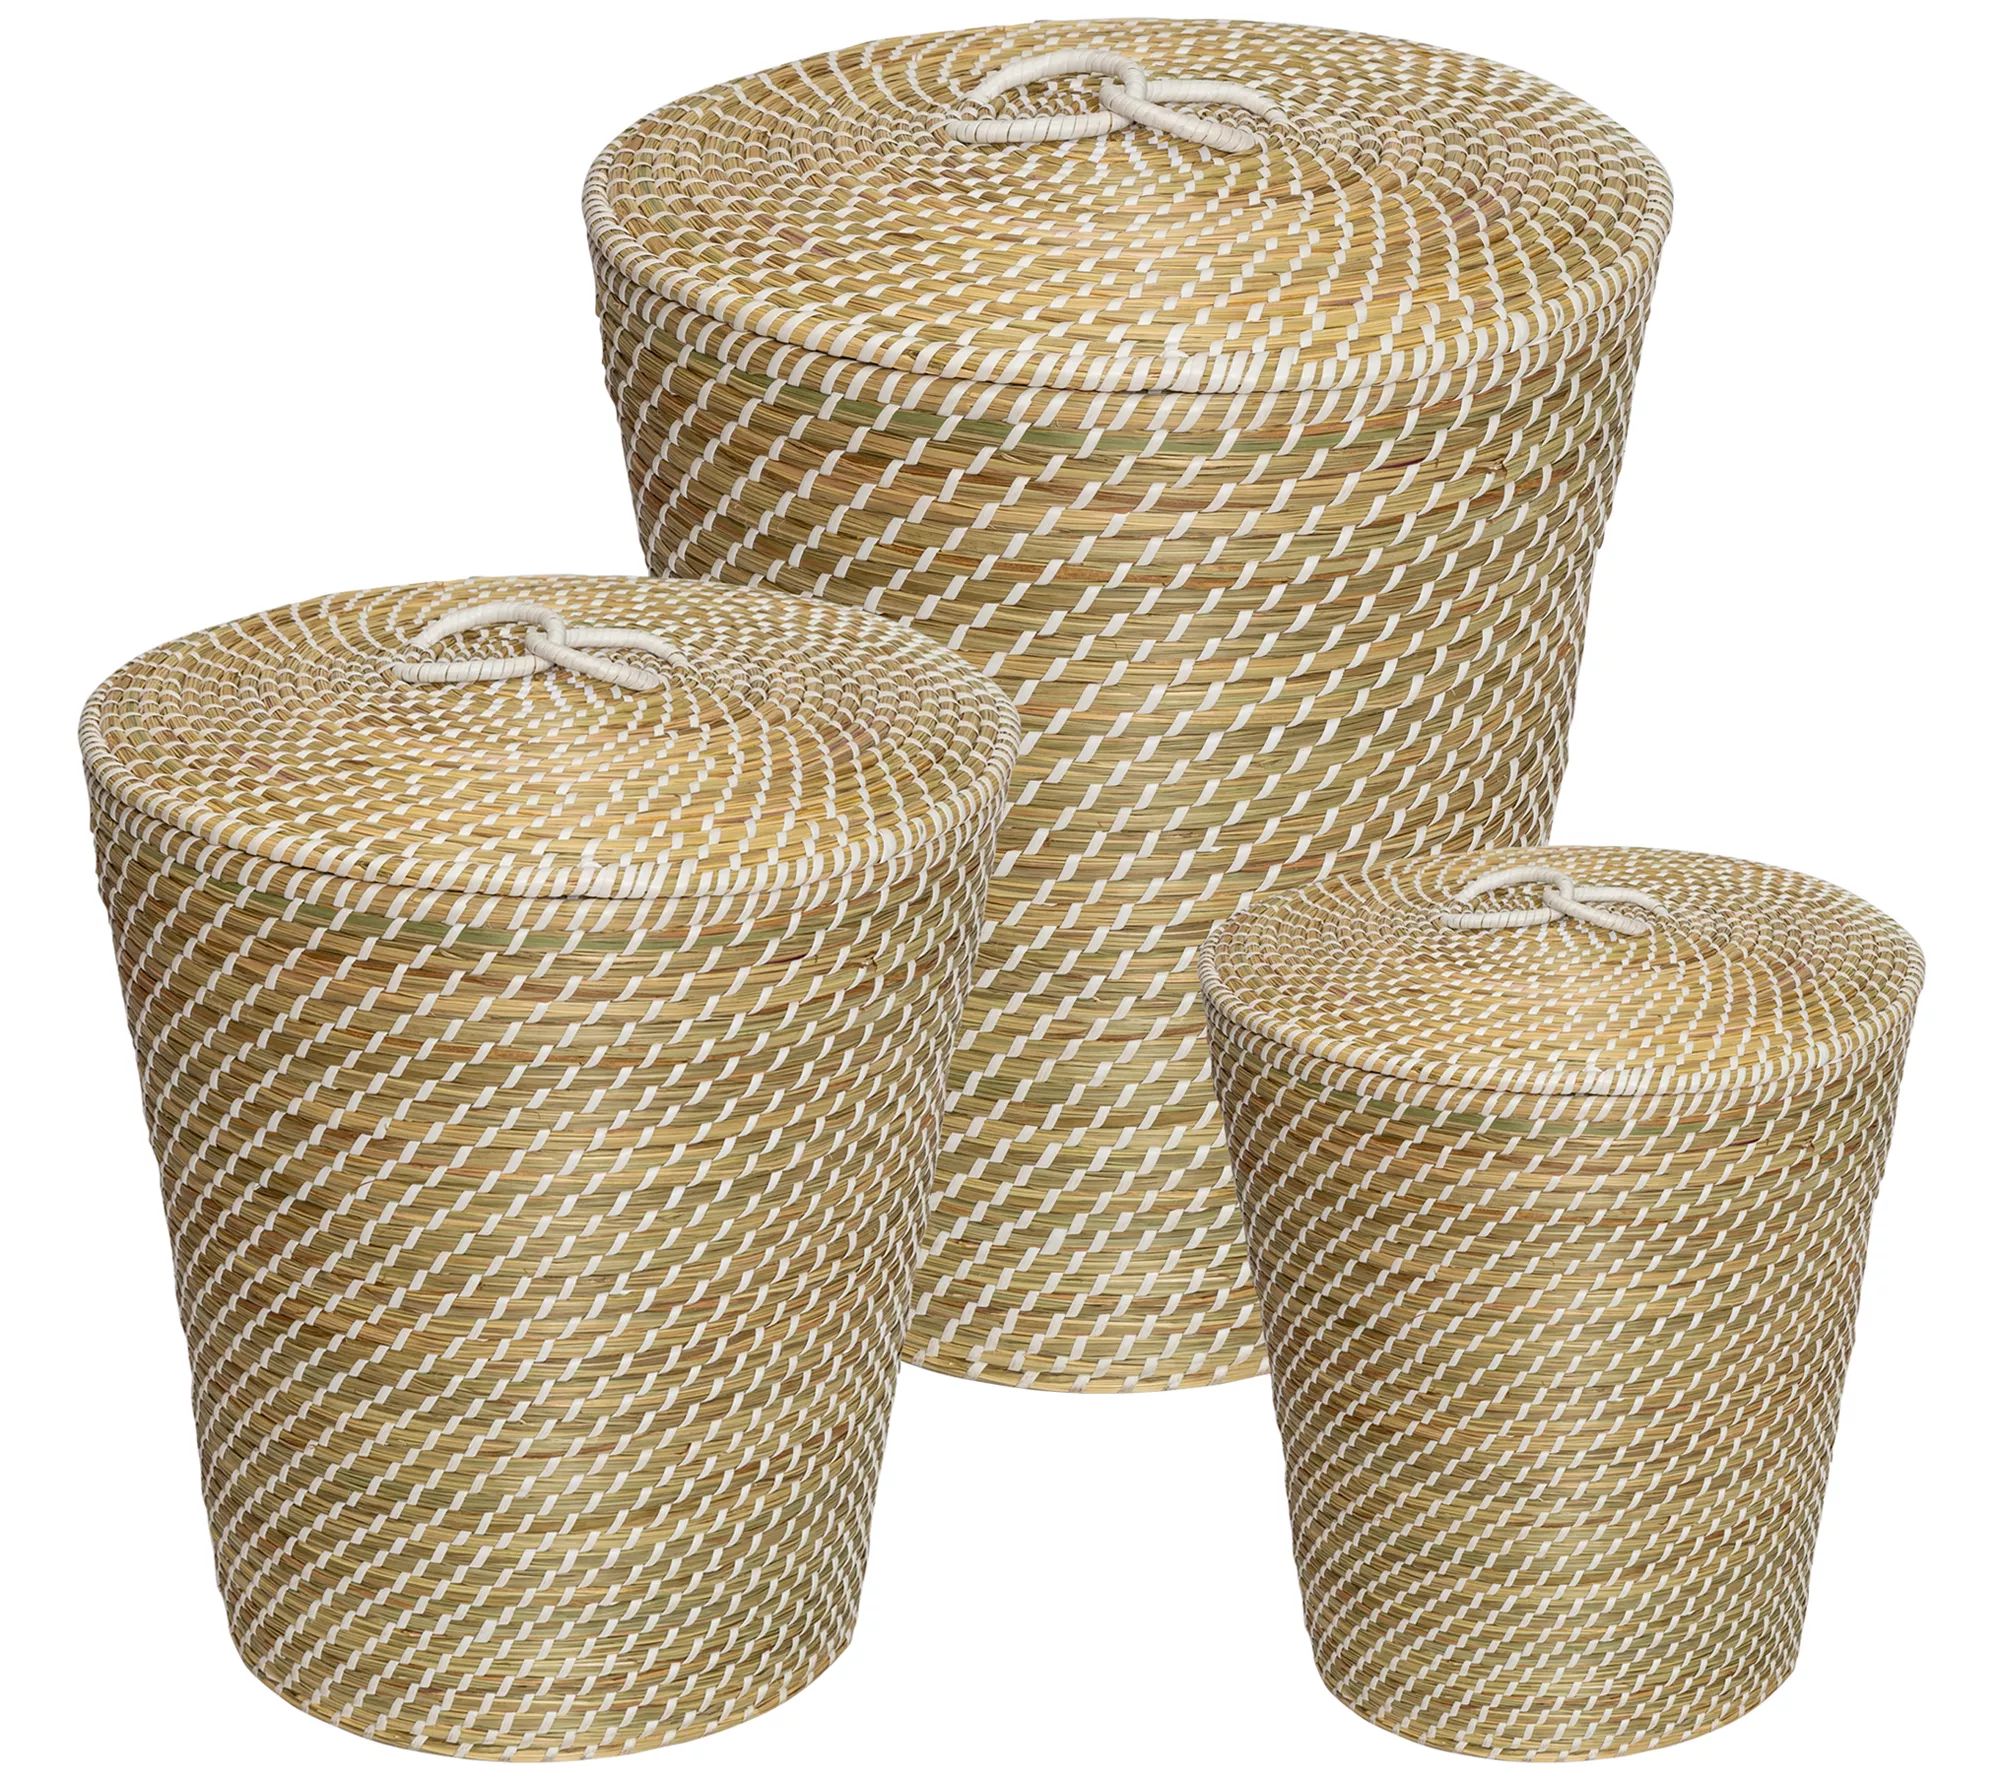 Honey Can Do Set of 3 Seagrass Baskets, Natural | QVC